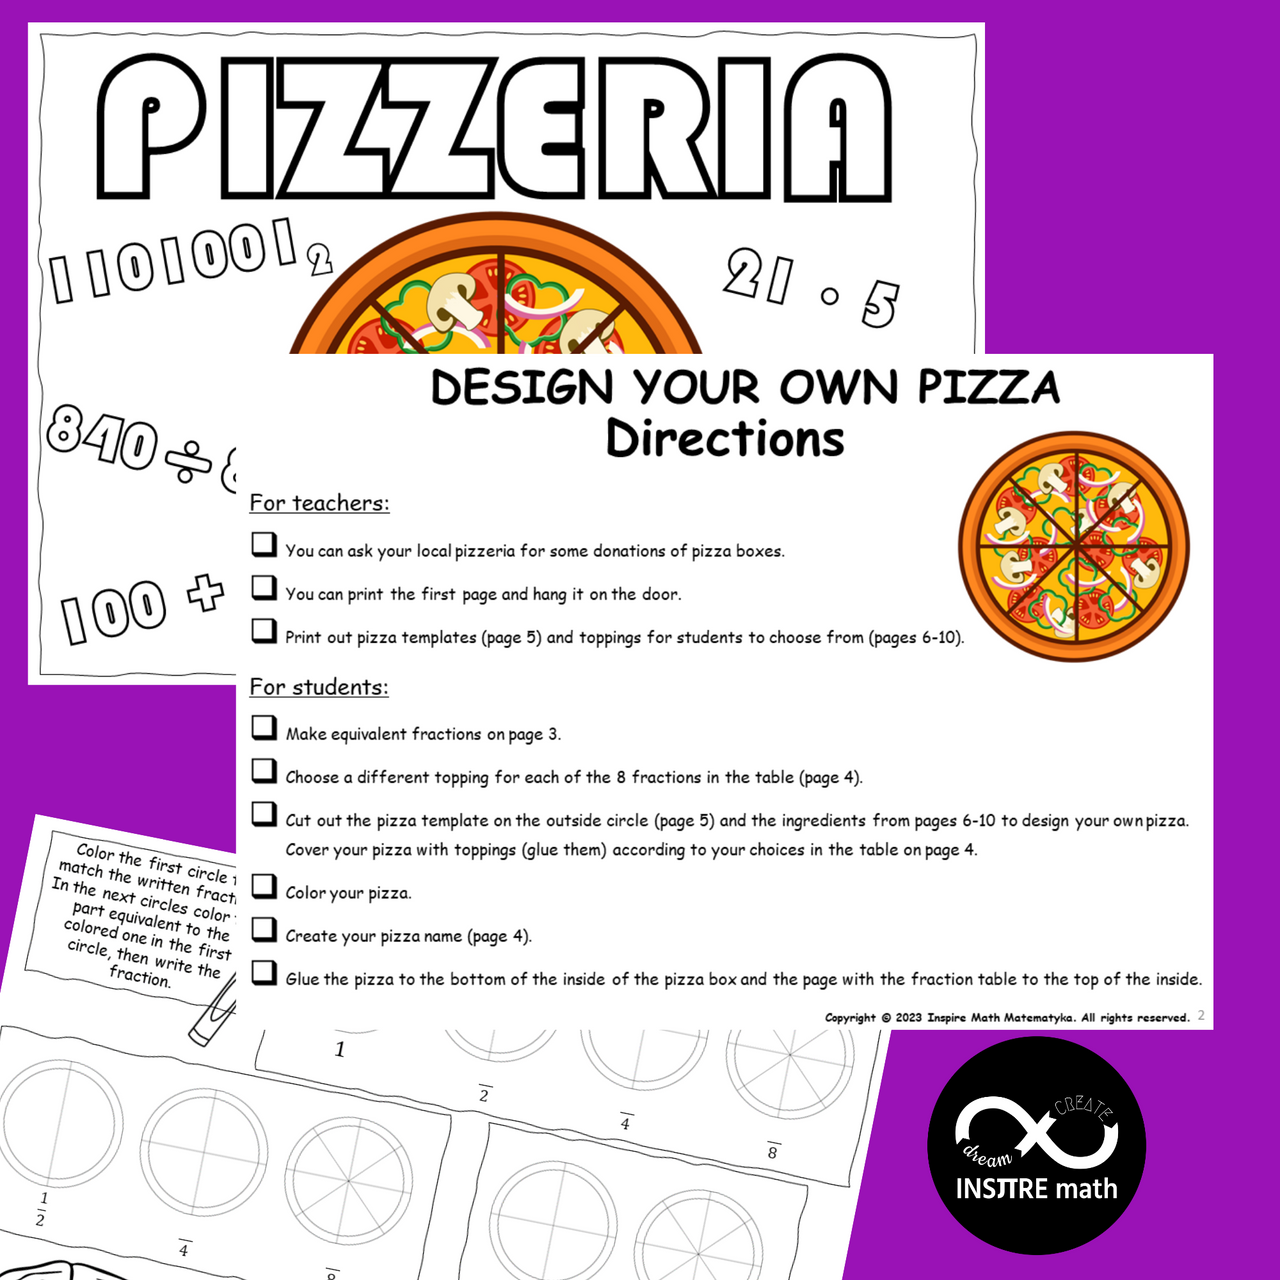 Pizza Math Project Equivalent Fractions. 3rd 4th Gr Craft Project Based Learning